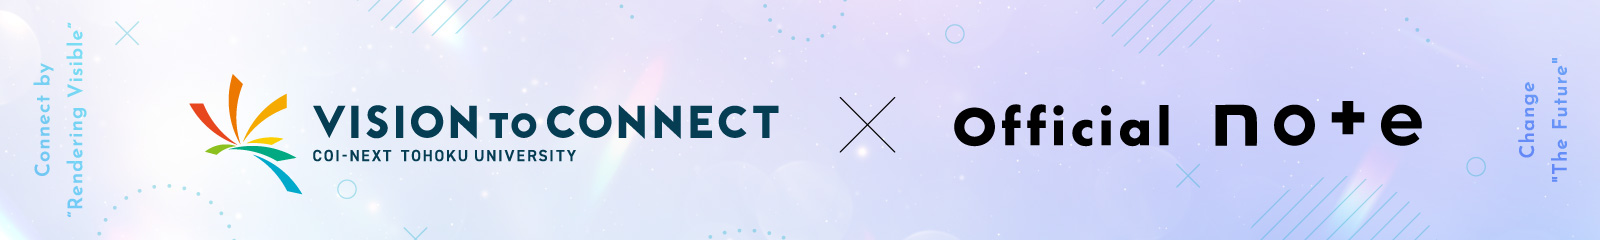 Vision to Connect Official note